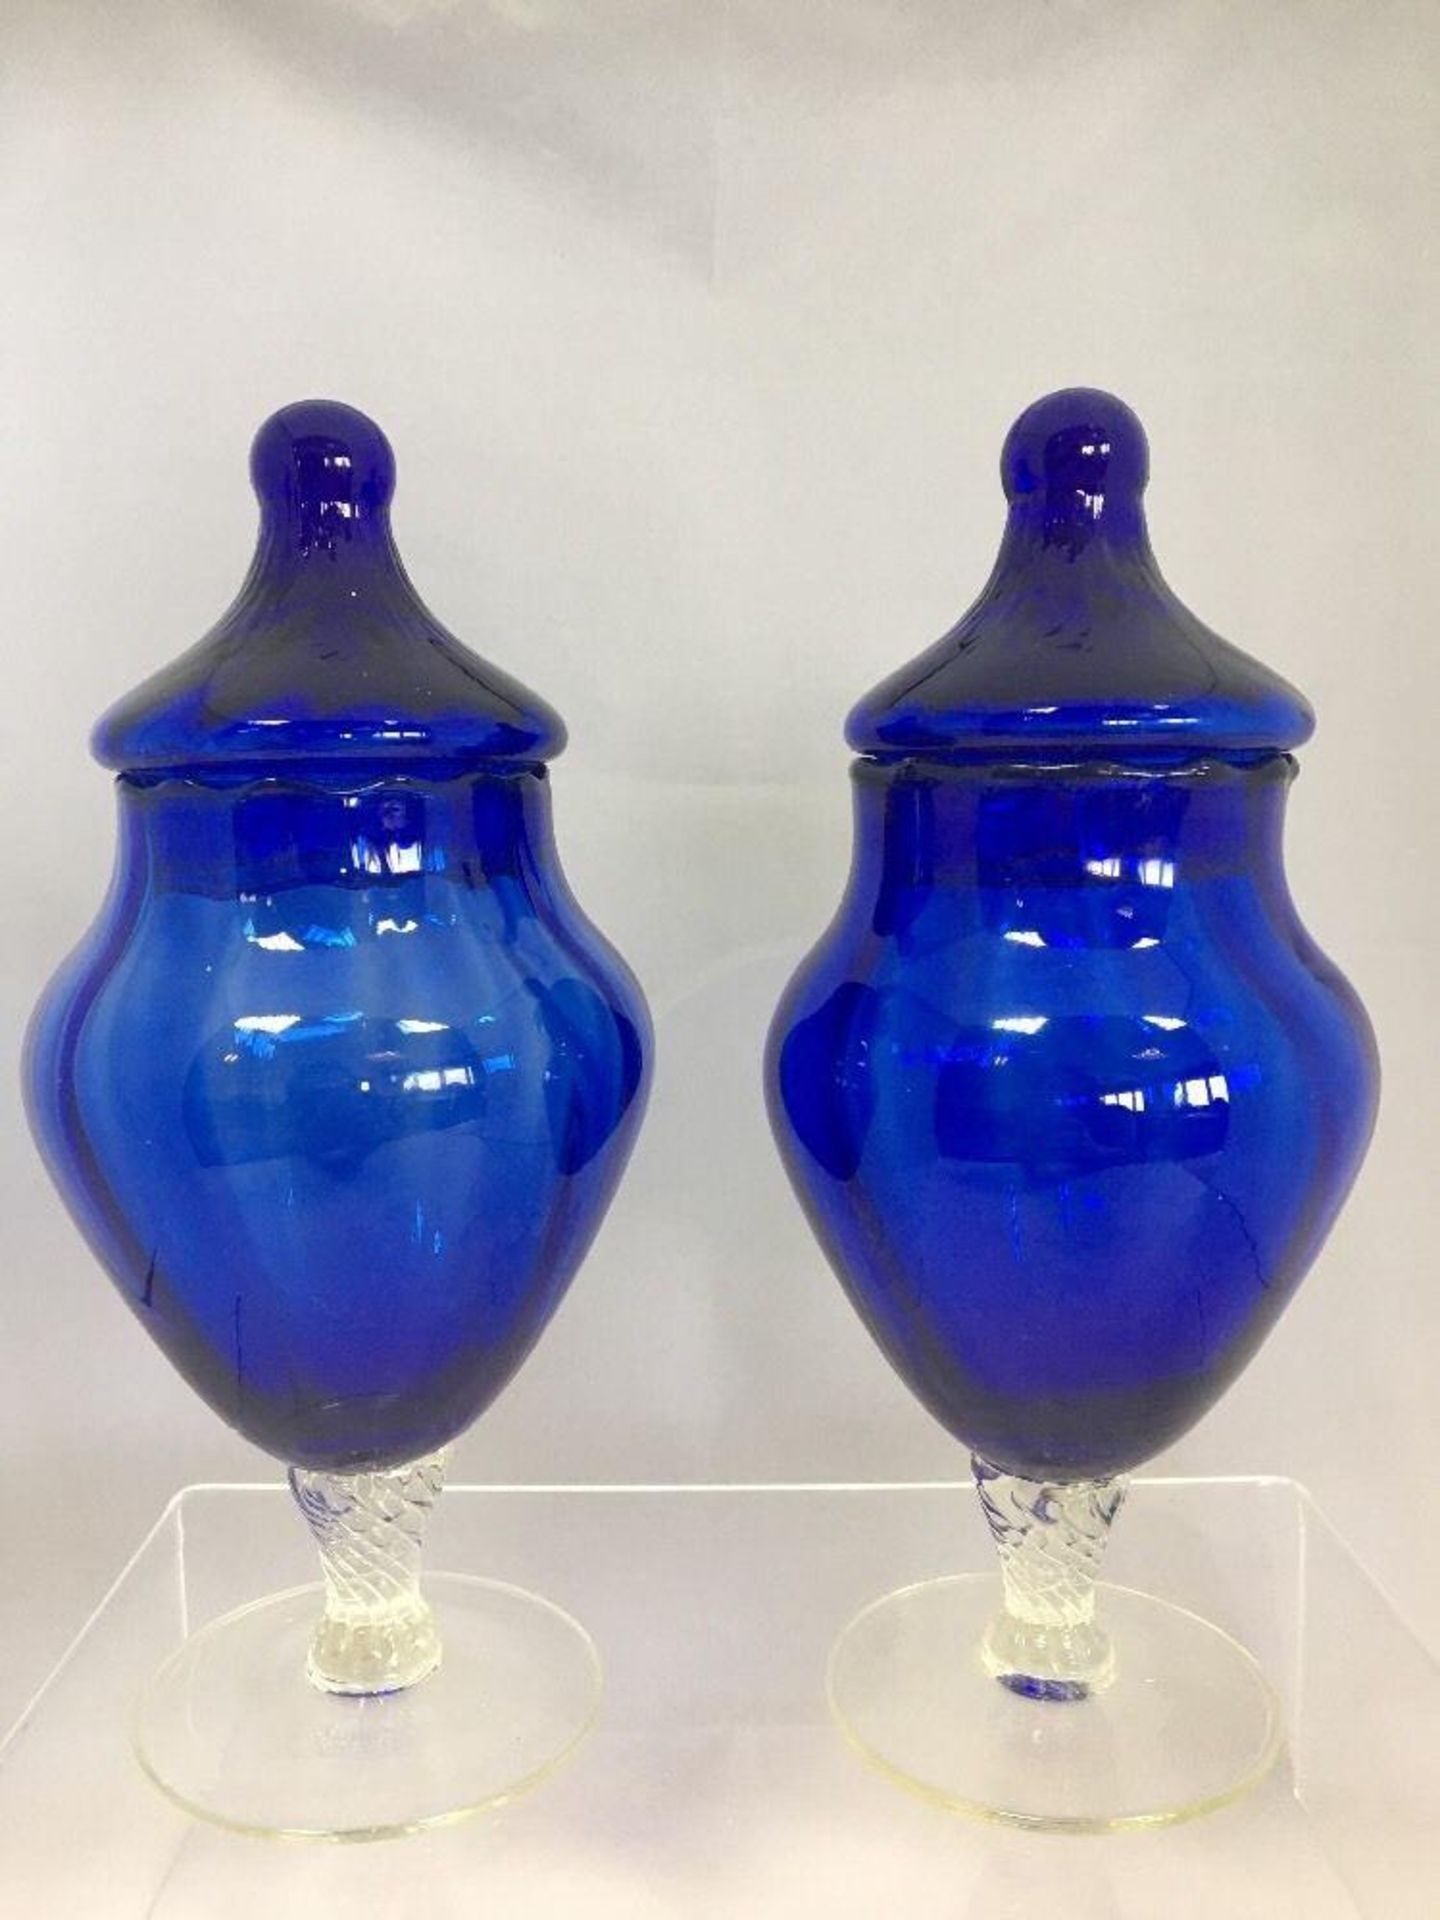 Pair of Antique Bristol Blue Glass Footed Hand Blown Lidded Jars. Both are in excellent condition